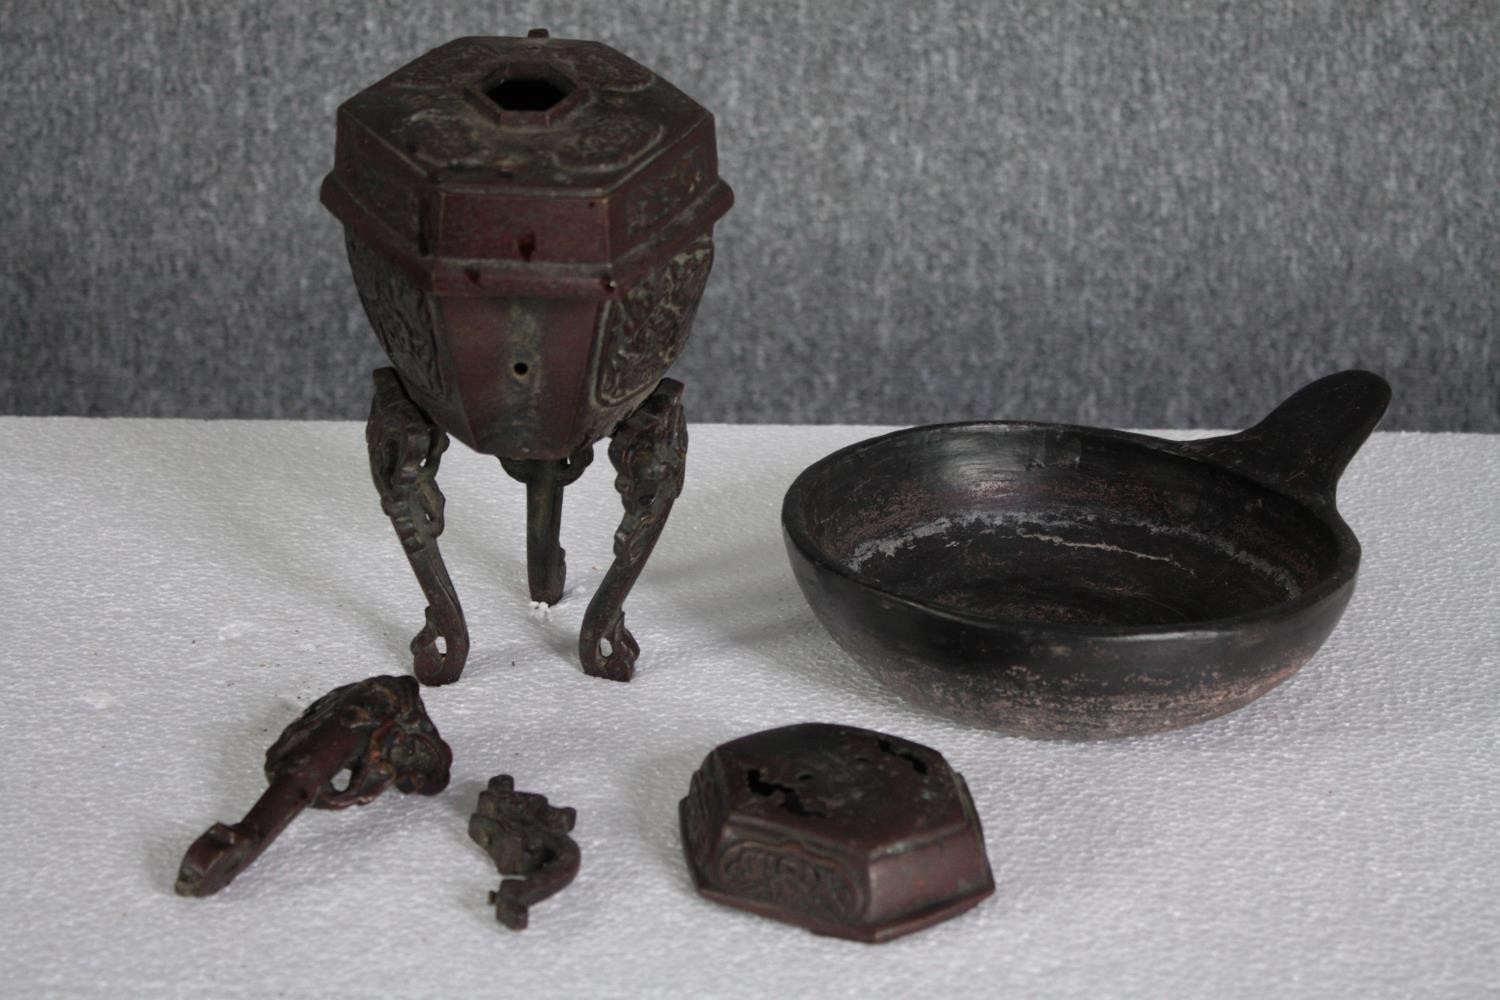 An mixed collection of iron and bronze metalware. Includes a pot on a stand with one leg detached